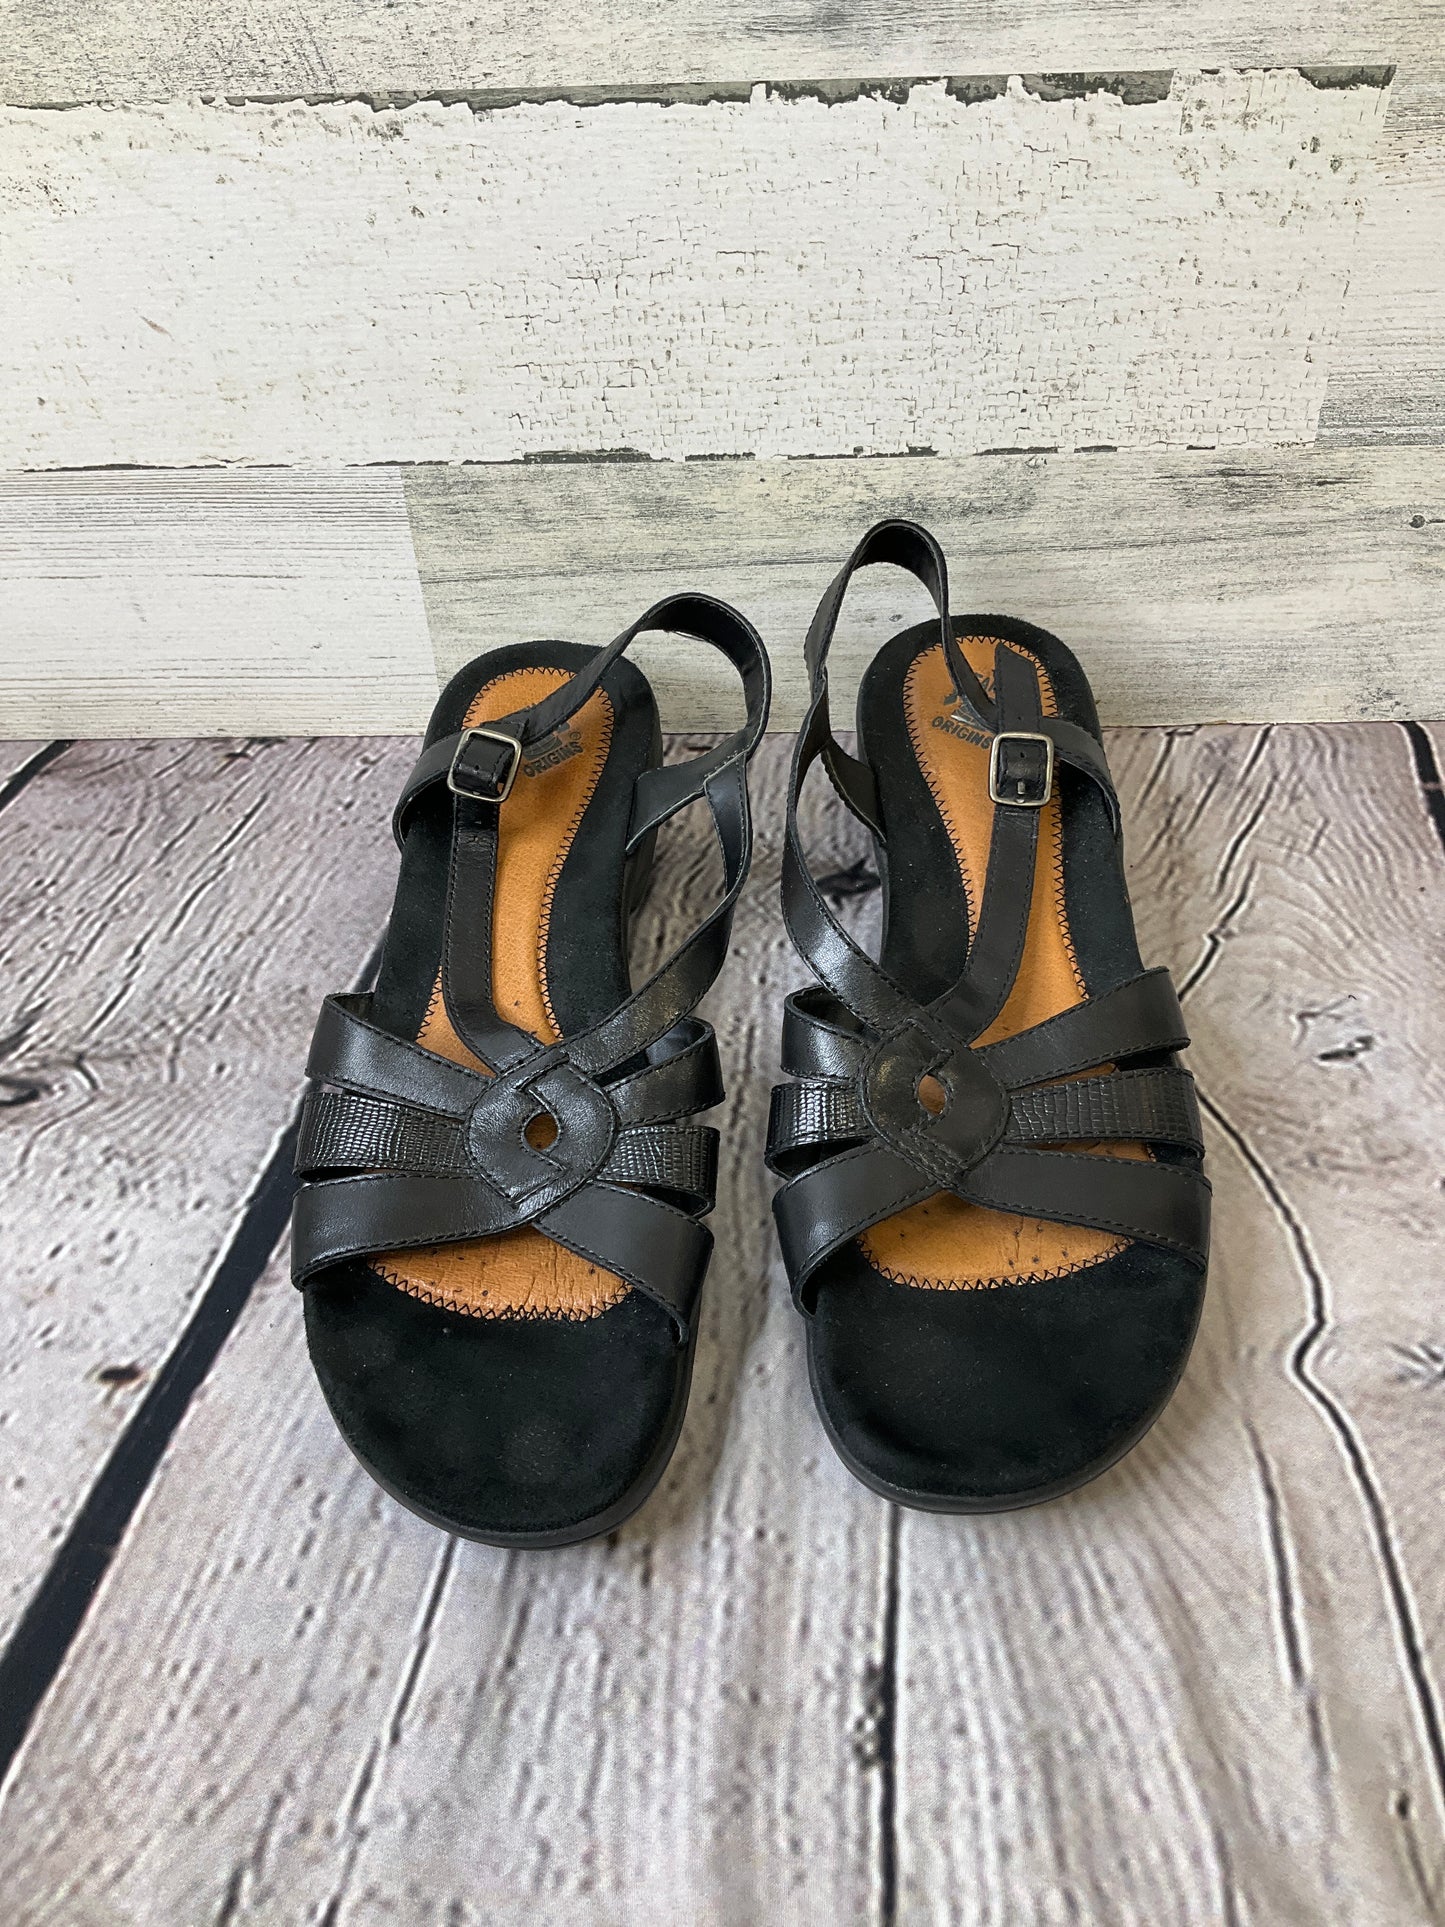 Sandals Flats By Earth Origins  Size: 9.5